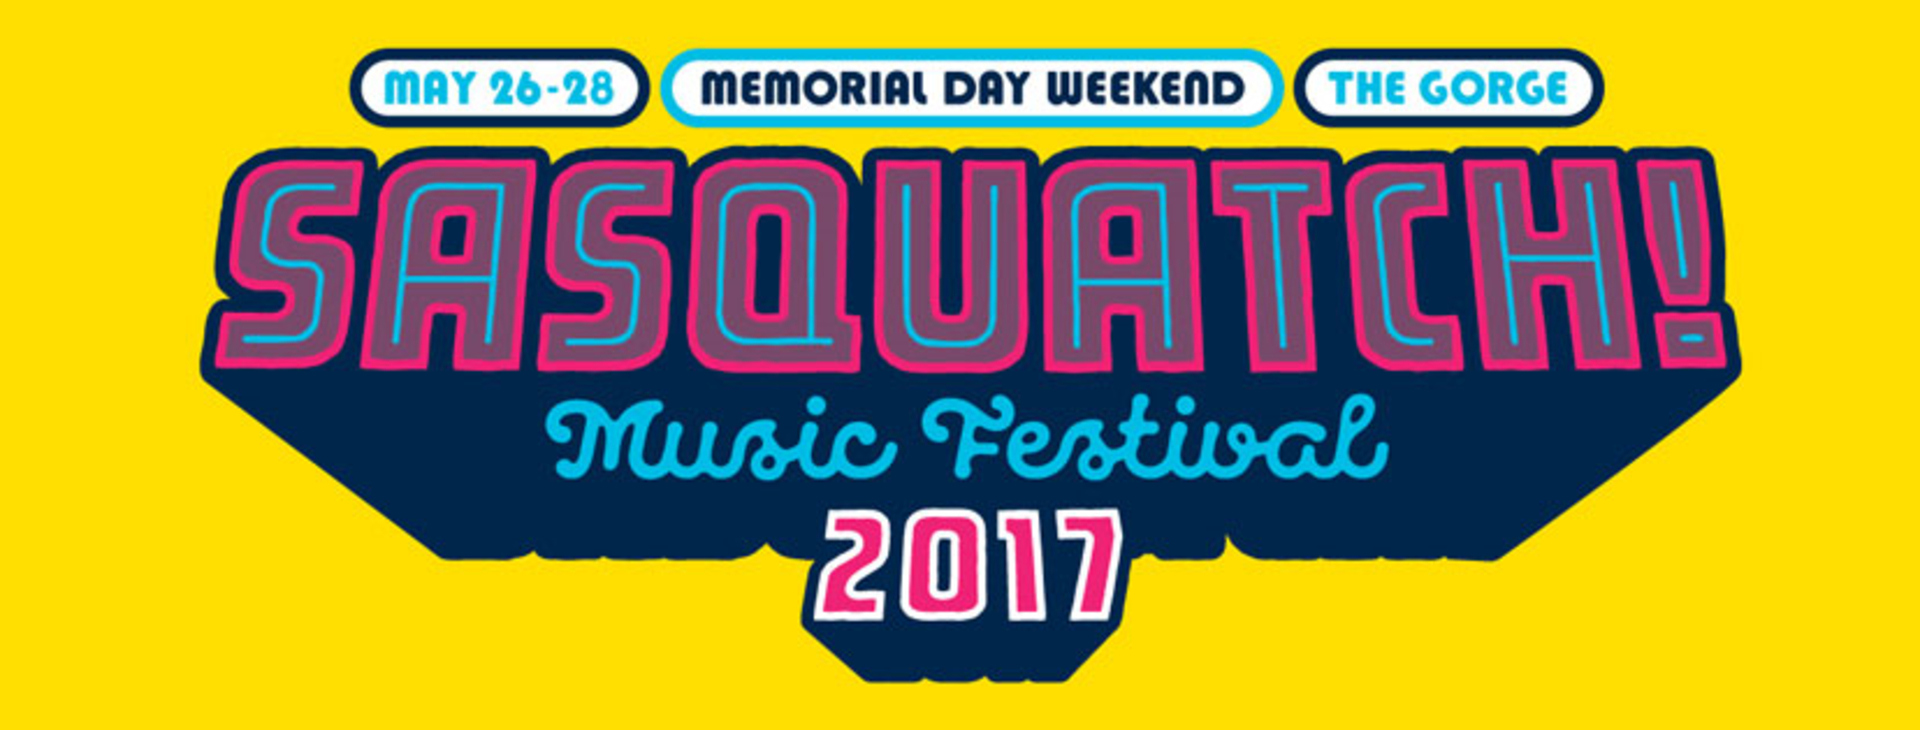 Sasquatch 2017 Lineup Leaves Many Scratching Their Heads